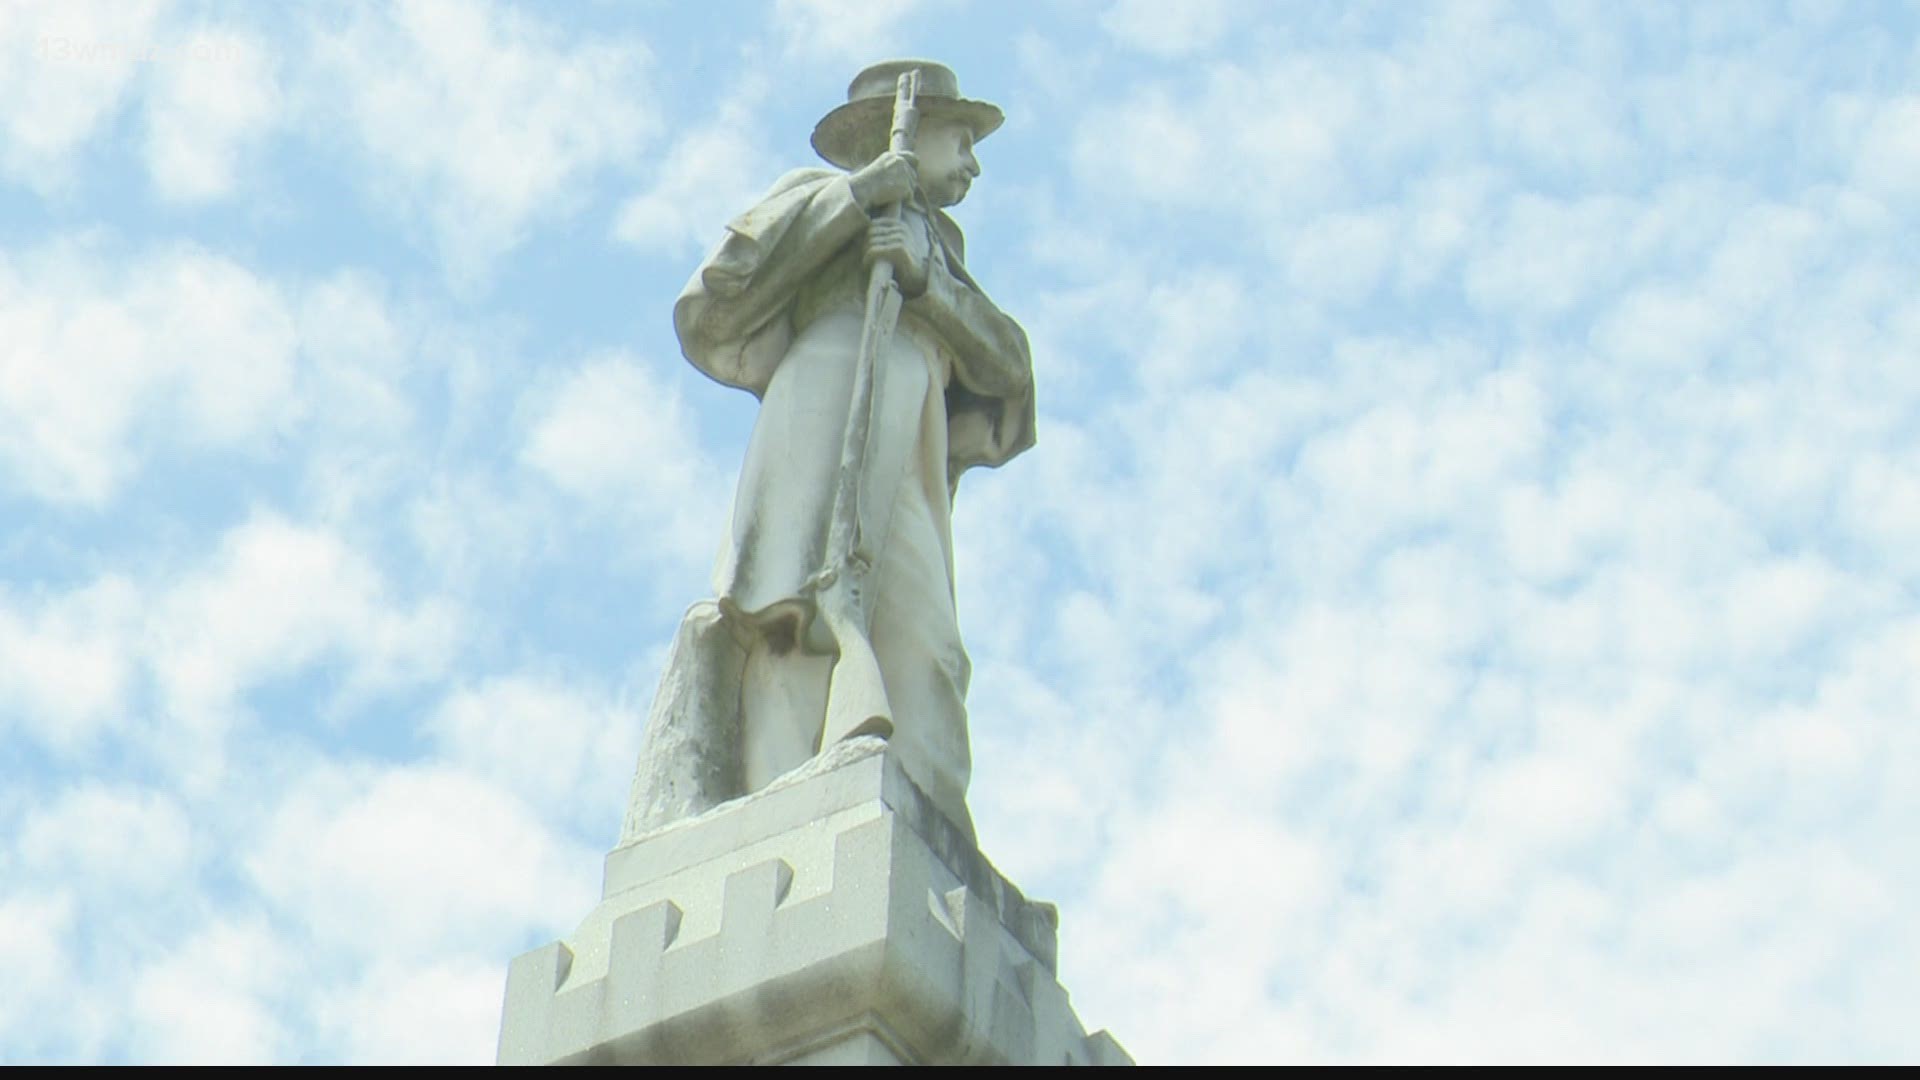 Petitions and protests across the country are calling for the destruction or removal of confederate statues, including right here in Perry.